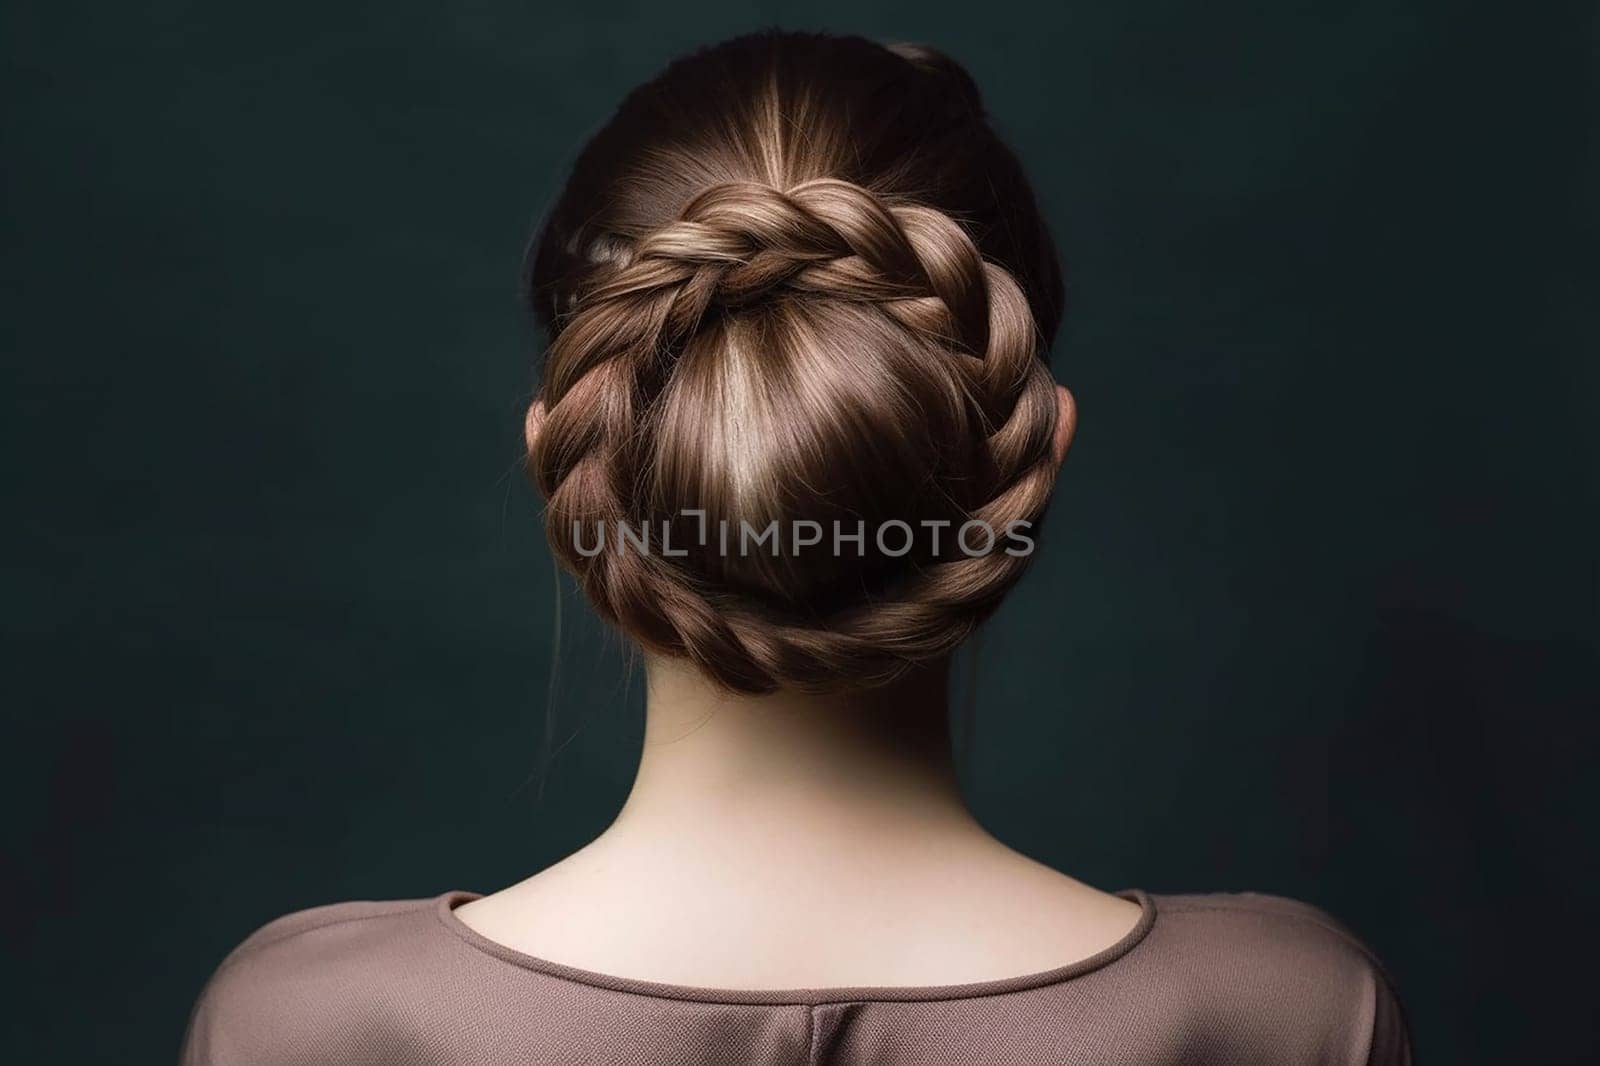 Elegant braided hairstyle on a woman against a dark background. by Hype2art